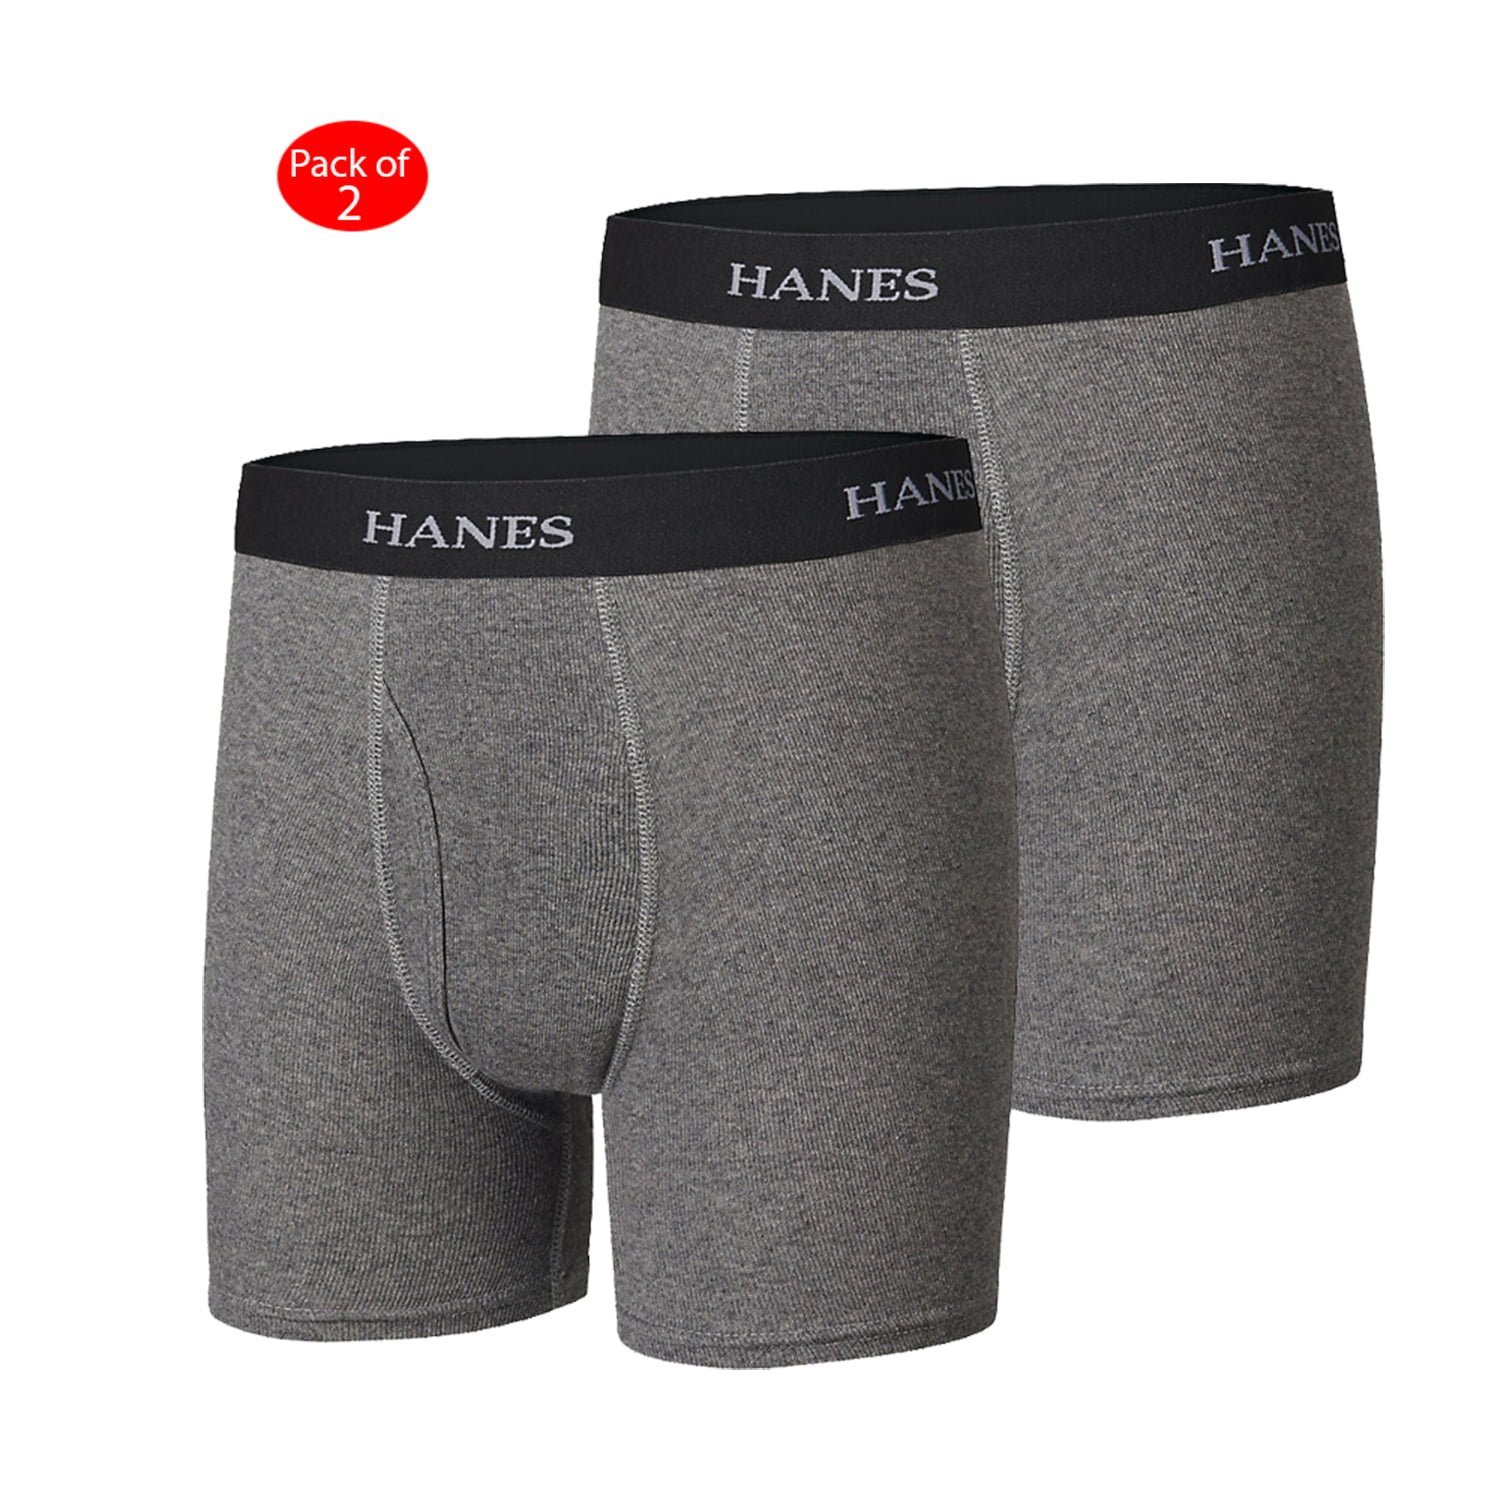 Details about   8 Hanes Boys' Ultimate Boxer Briefs w/Comfort Flex Waistband Size Small 6-8 NEW! 